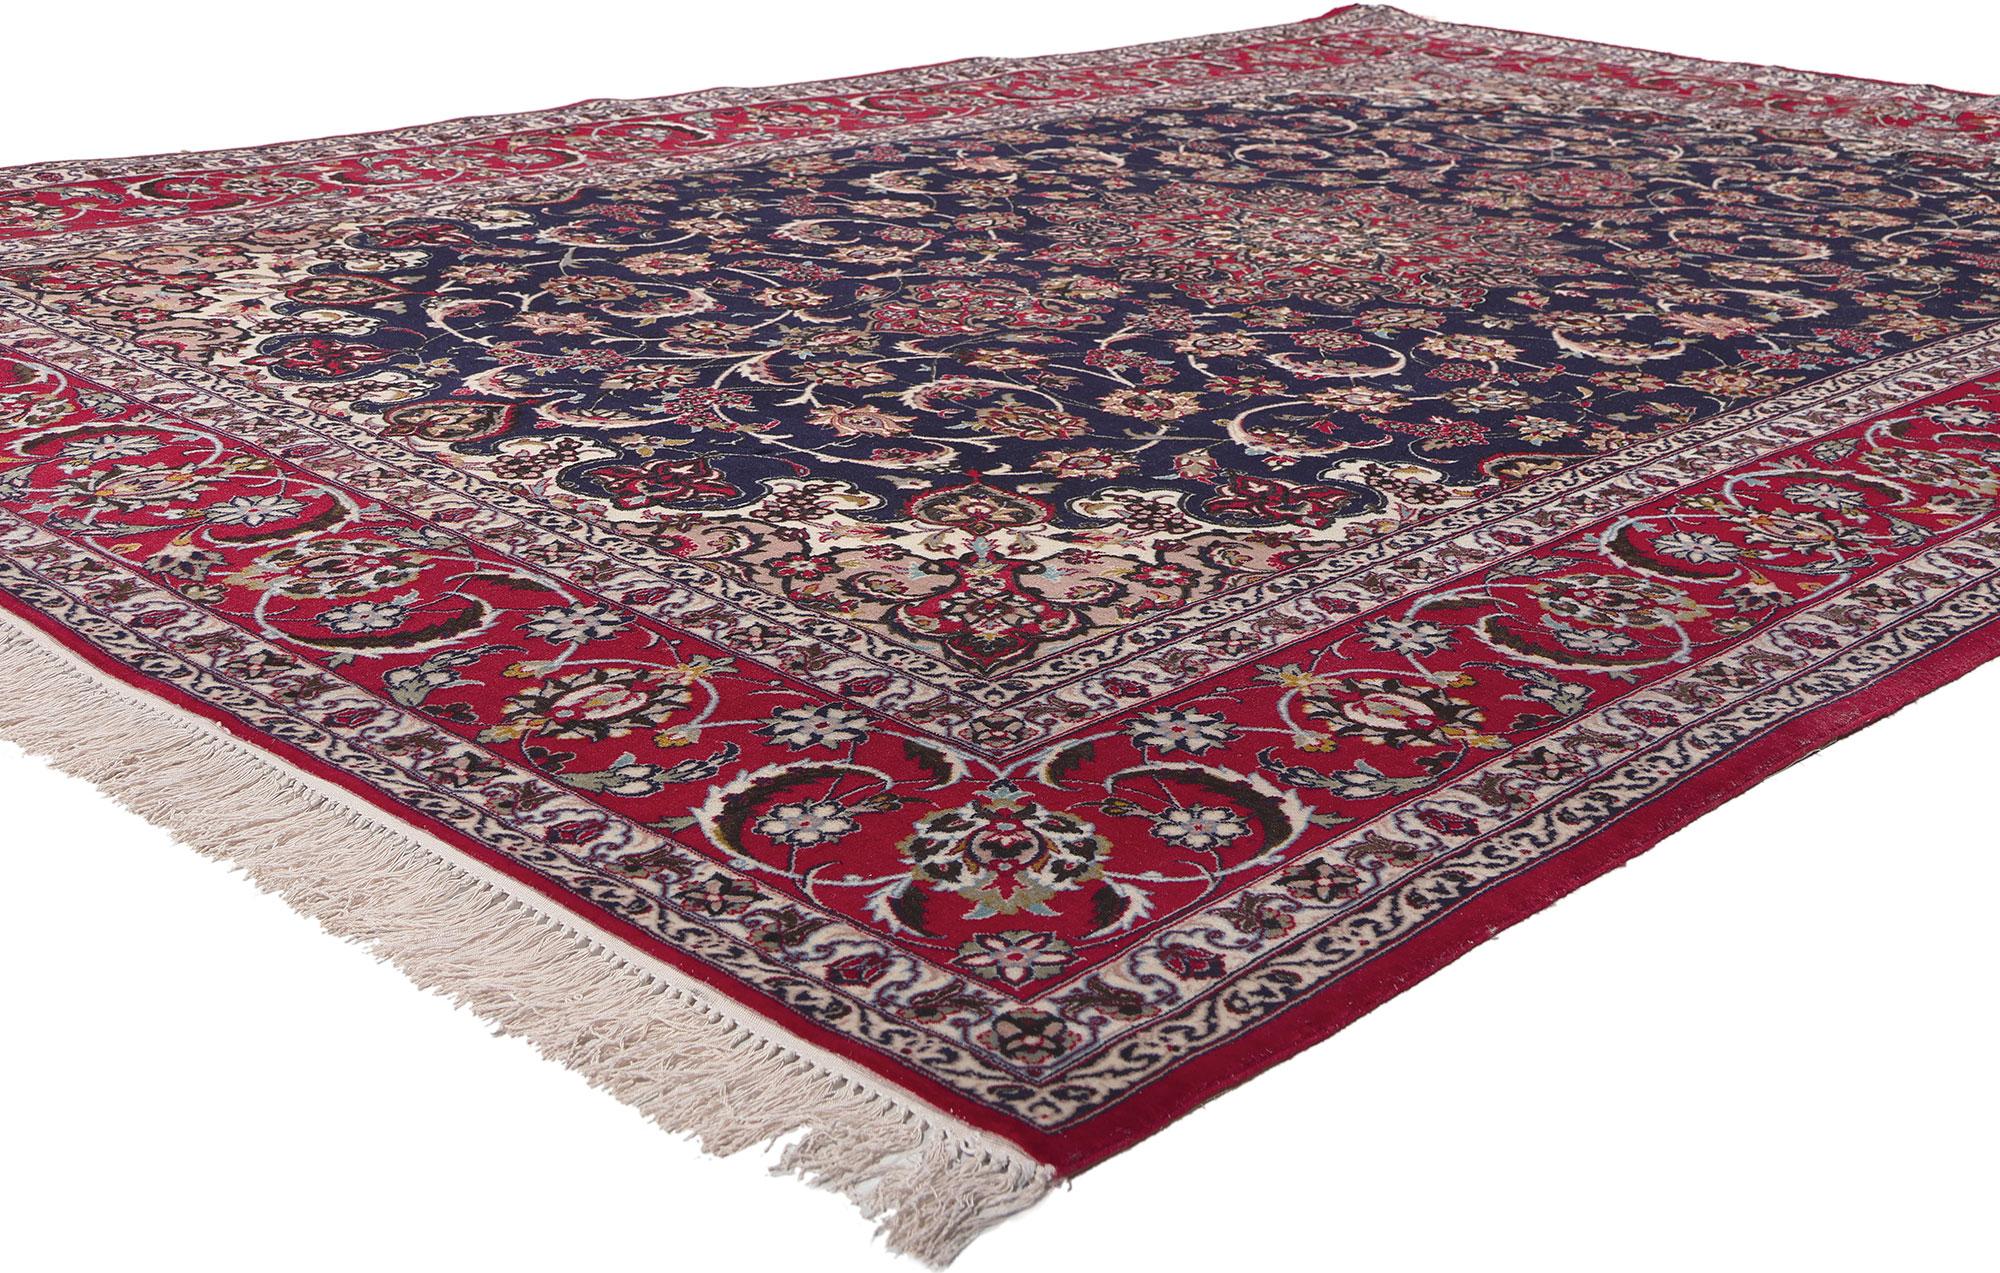 78670 Vintage Persian Isfahan Rug, 06'09 x 10'00. In the enchanting depths of central Iran, one discovers a sanctuary of creativity and heritage: the mesmerizing city of Isfahan. Within its ancient streets, where whispered tales of old intertwine